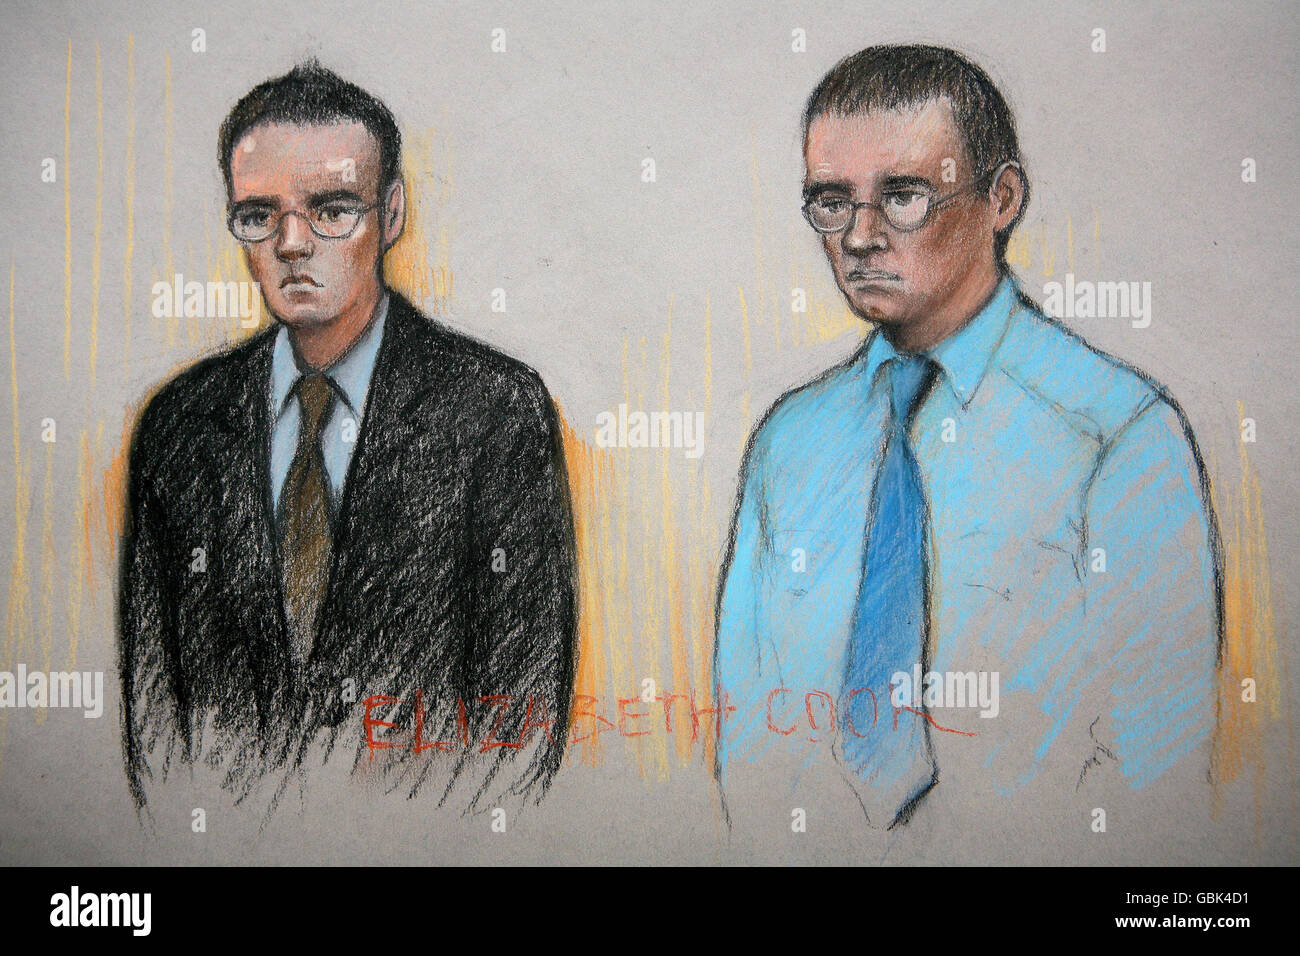 An artist's impression of Dano Sonnex, 23, (left) and Nigel Farmer, 34, during a murder trial at the Old Bailey in London. Both men are accused of murdering French students Laurent Bonomo and Gabriel Ferez at a flat in New Cross, south east London. Stock Photo